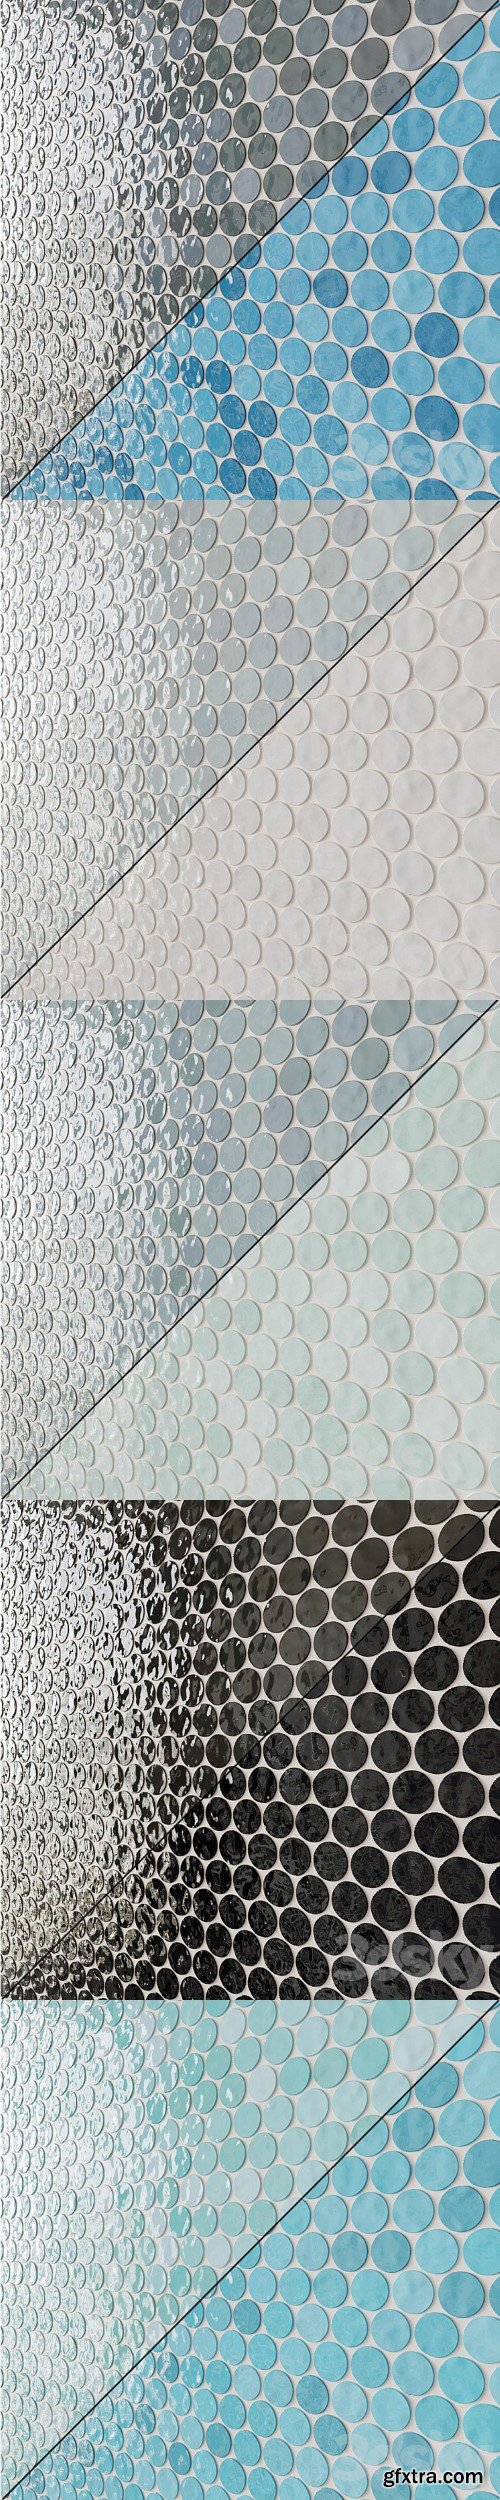 GlassPenny Round Mosaic Wall & Floor Tile 12 Colors